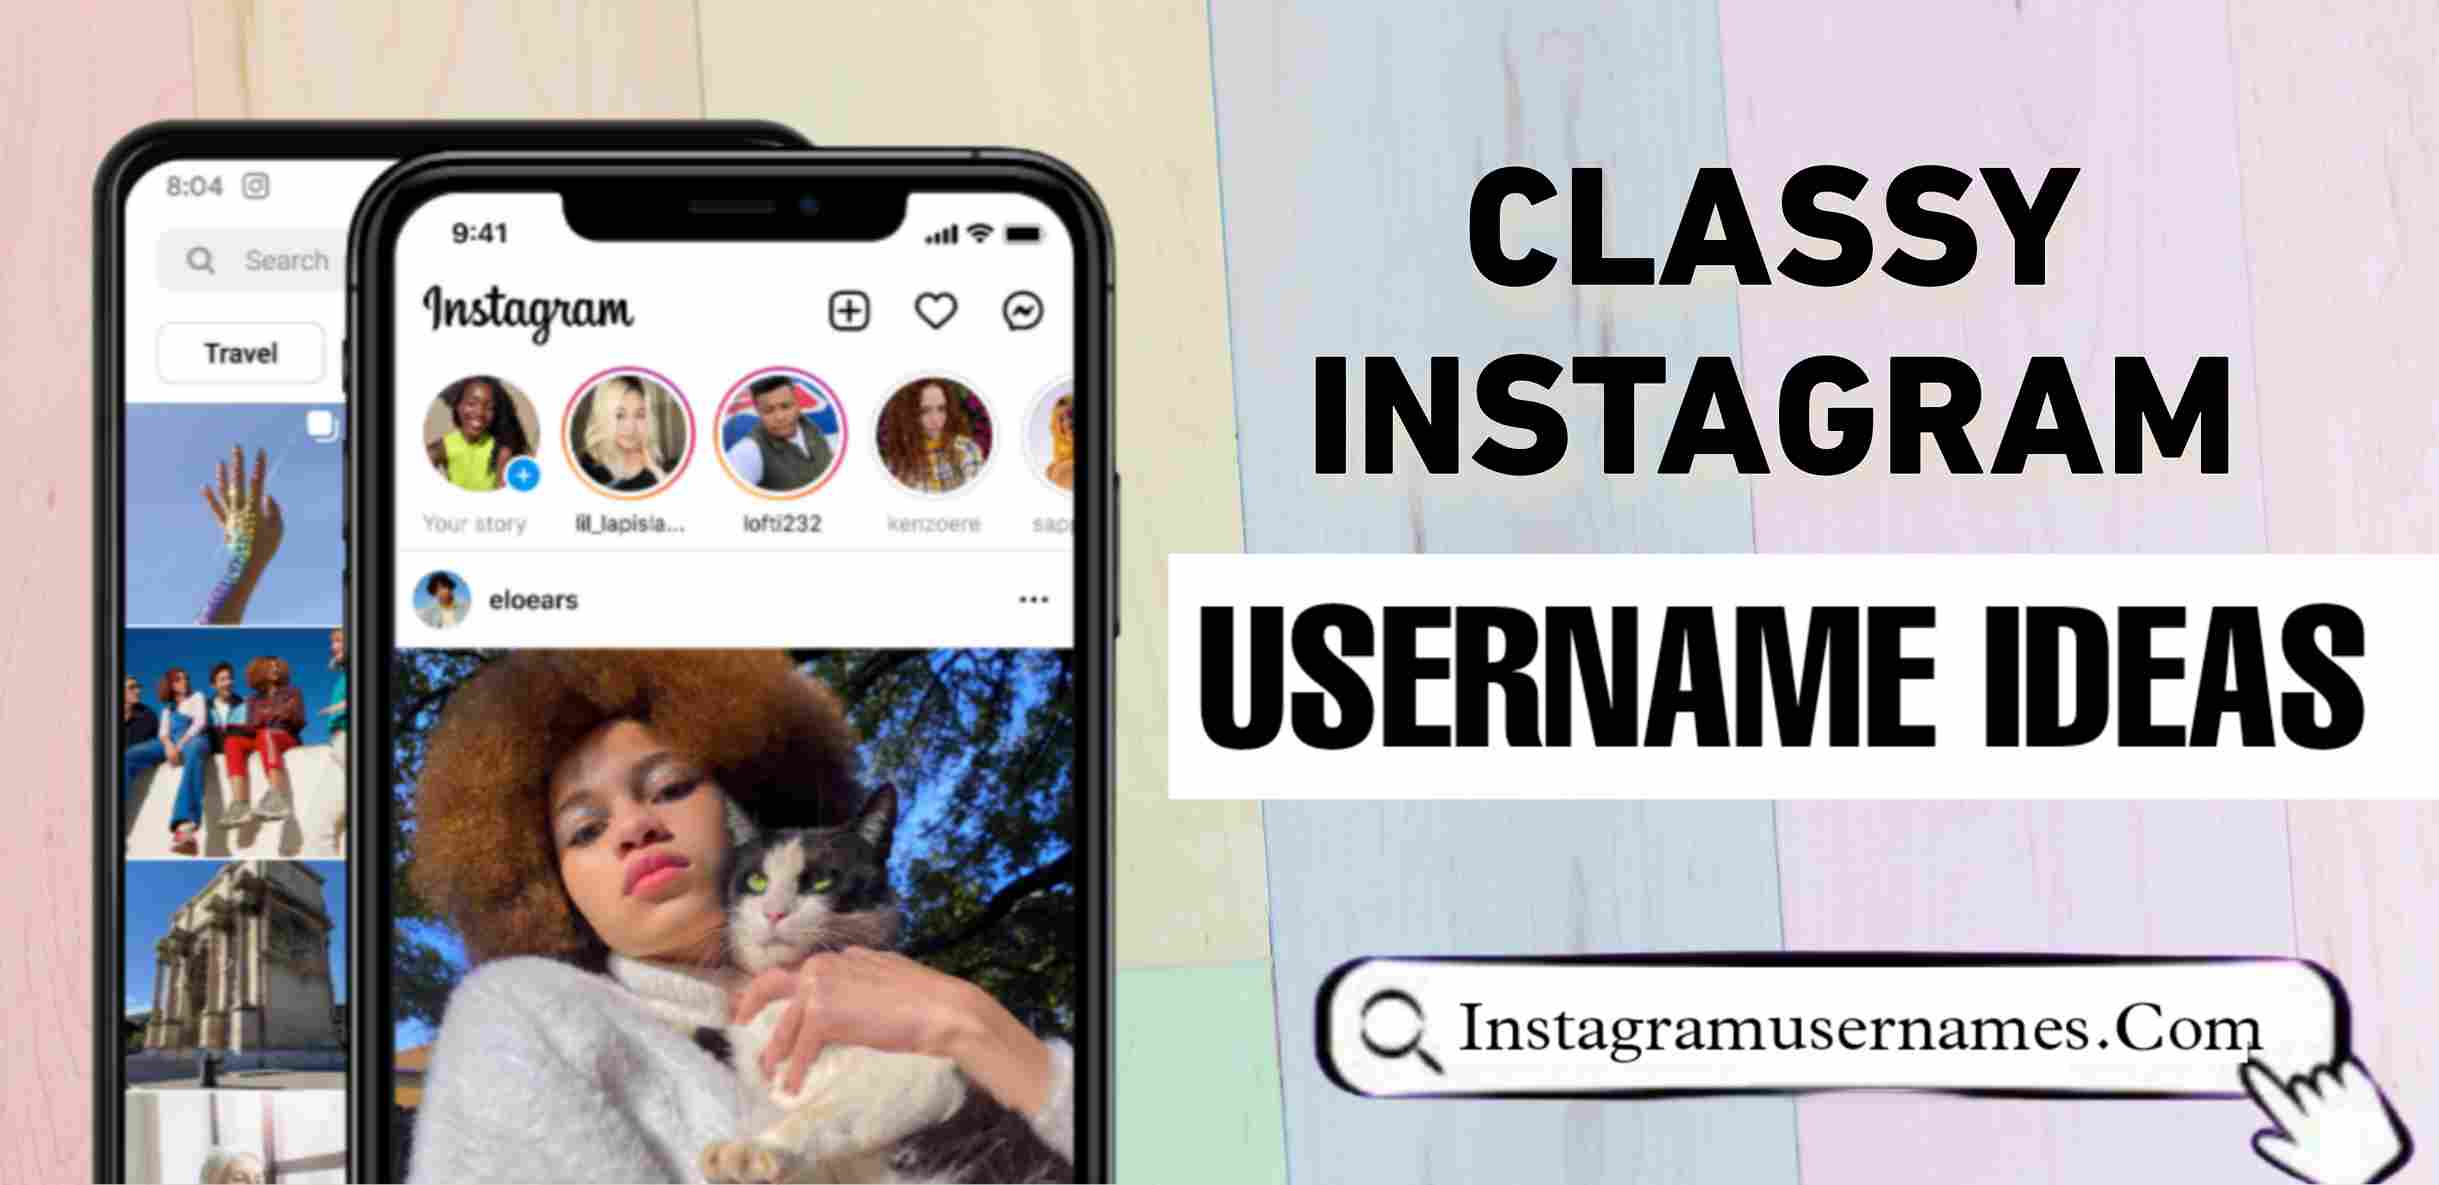 Classy Instagram Names For Boys, Girls and Couples